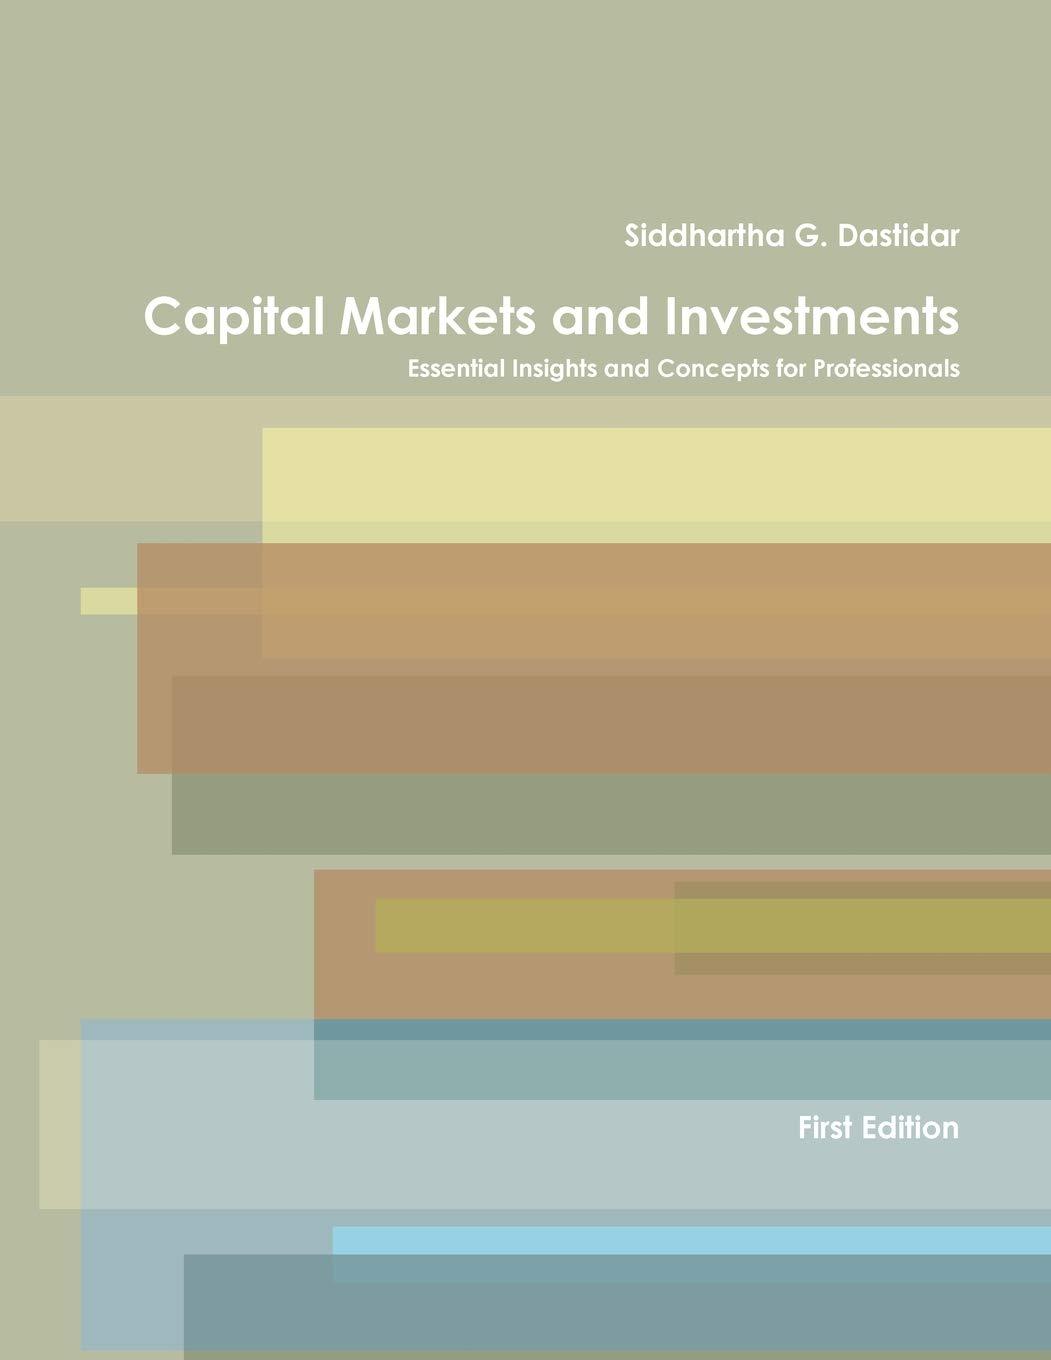 capital markets and investments essential insights and concepts for professionals 1st edition siddhartha g.